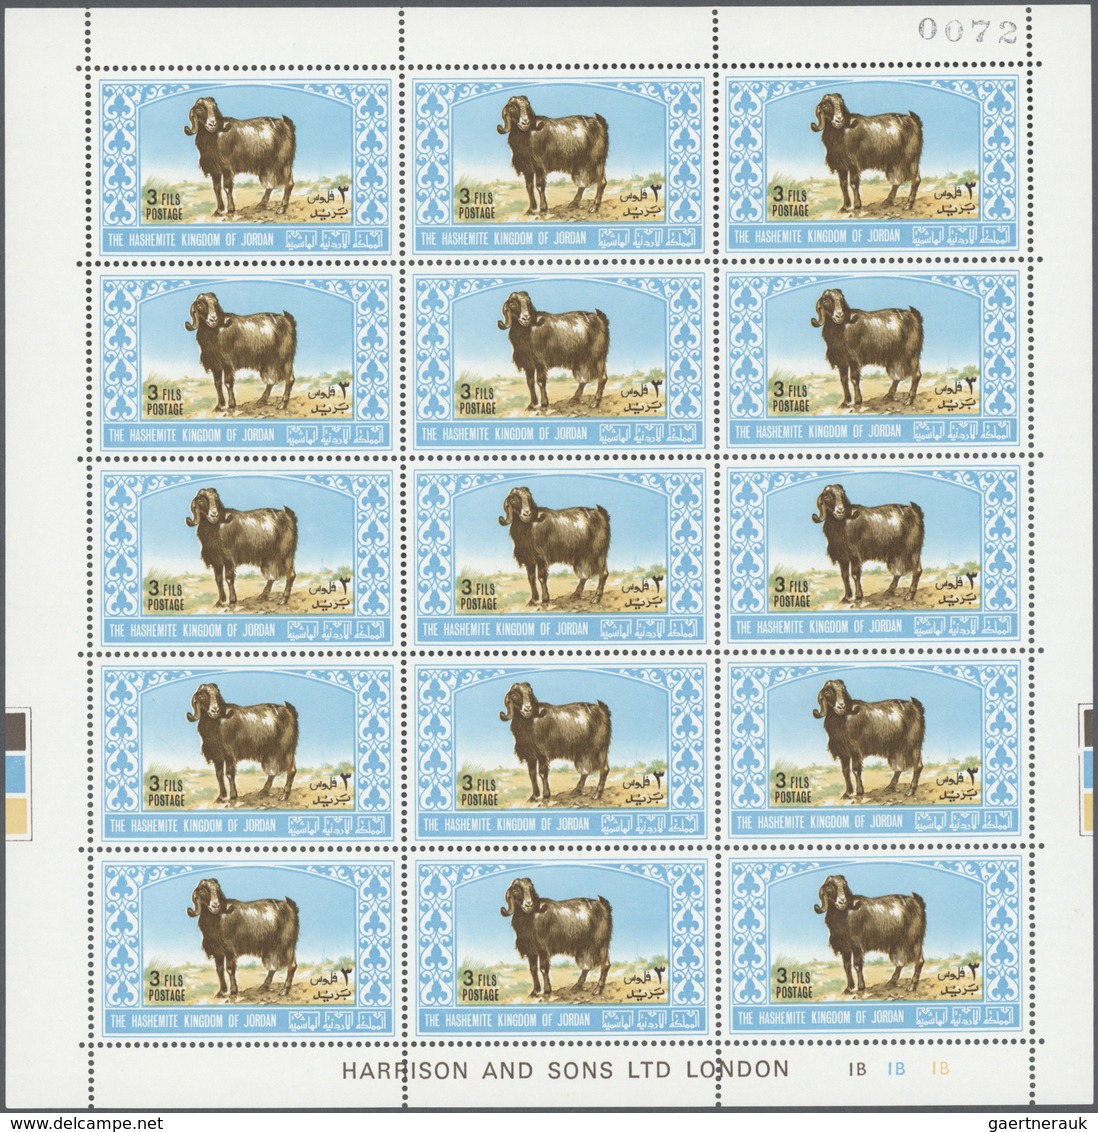 ** Jordanien: 1967, Animals, perforated, complete set of six values as sheets of 15 stamps with printer